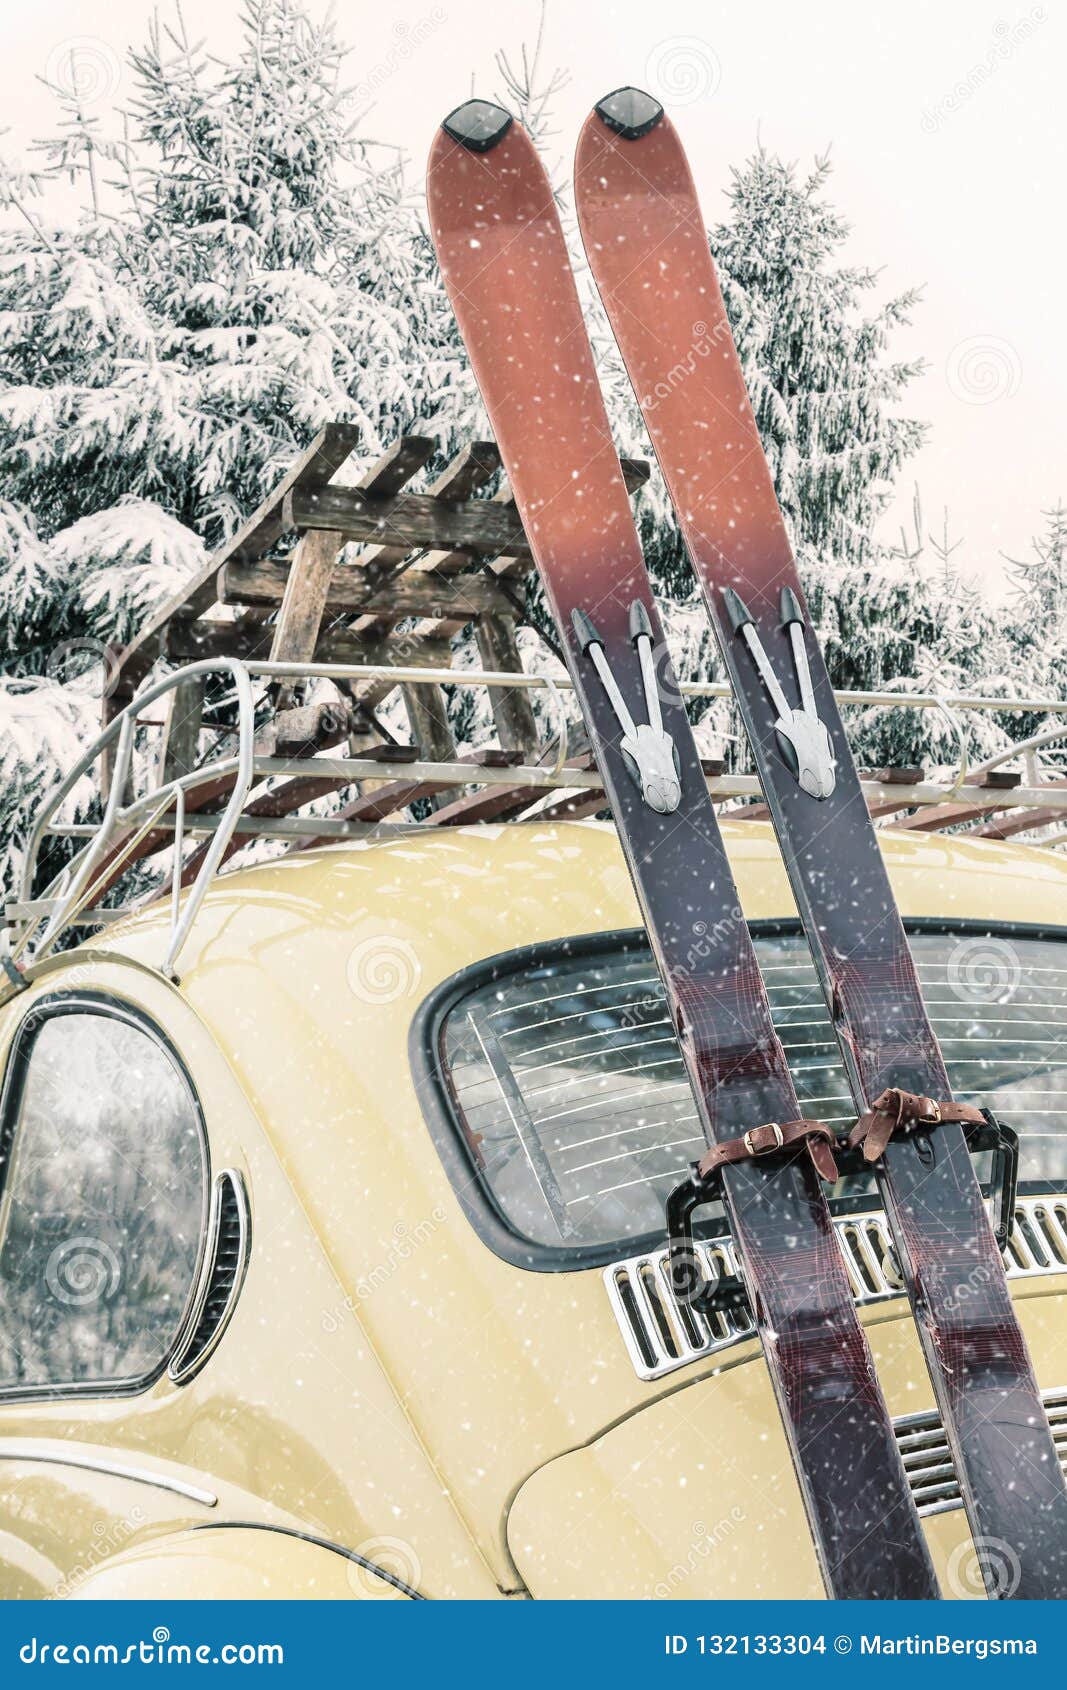 classic car with vintage ski`s and sled during snowfall